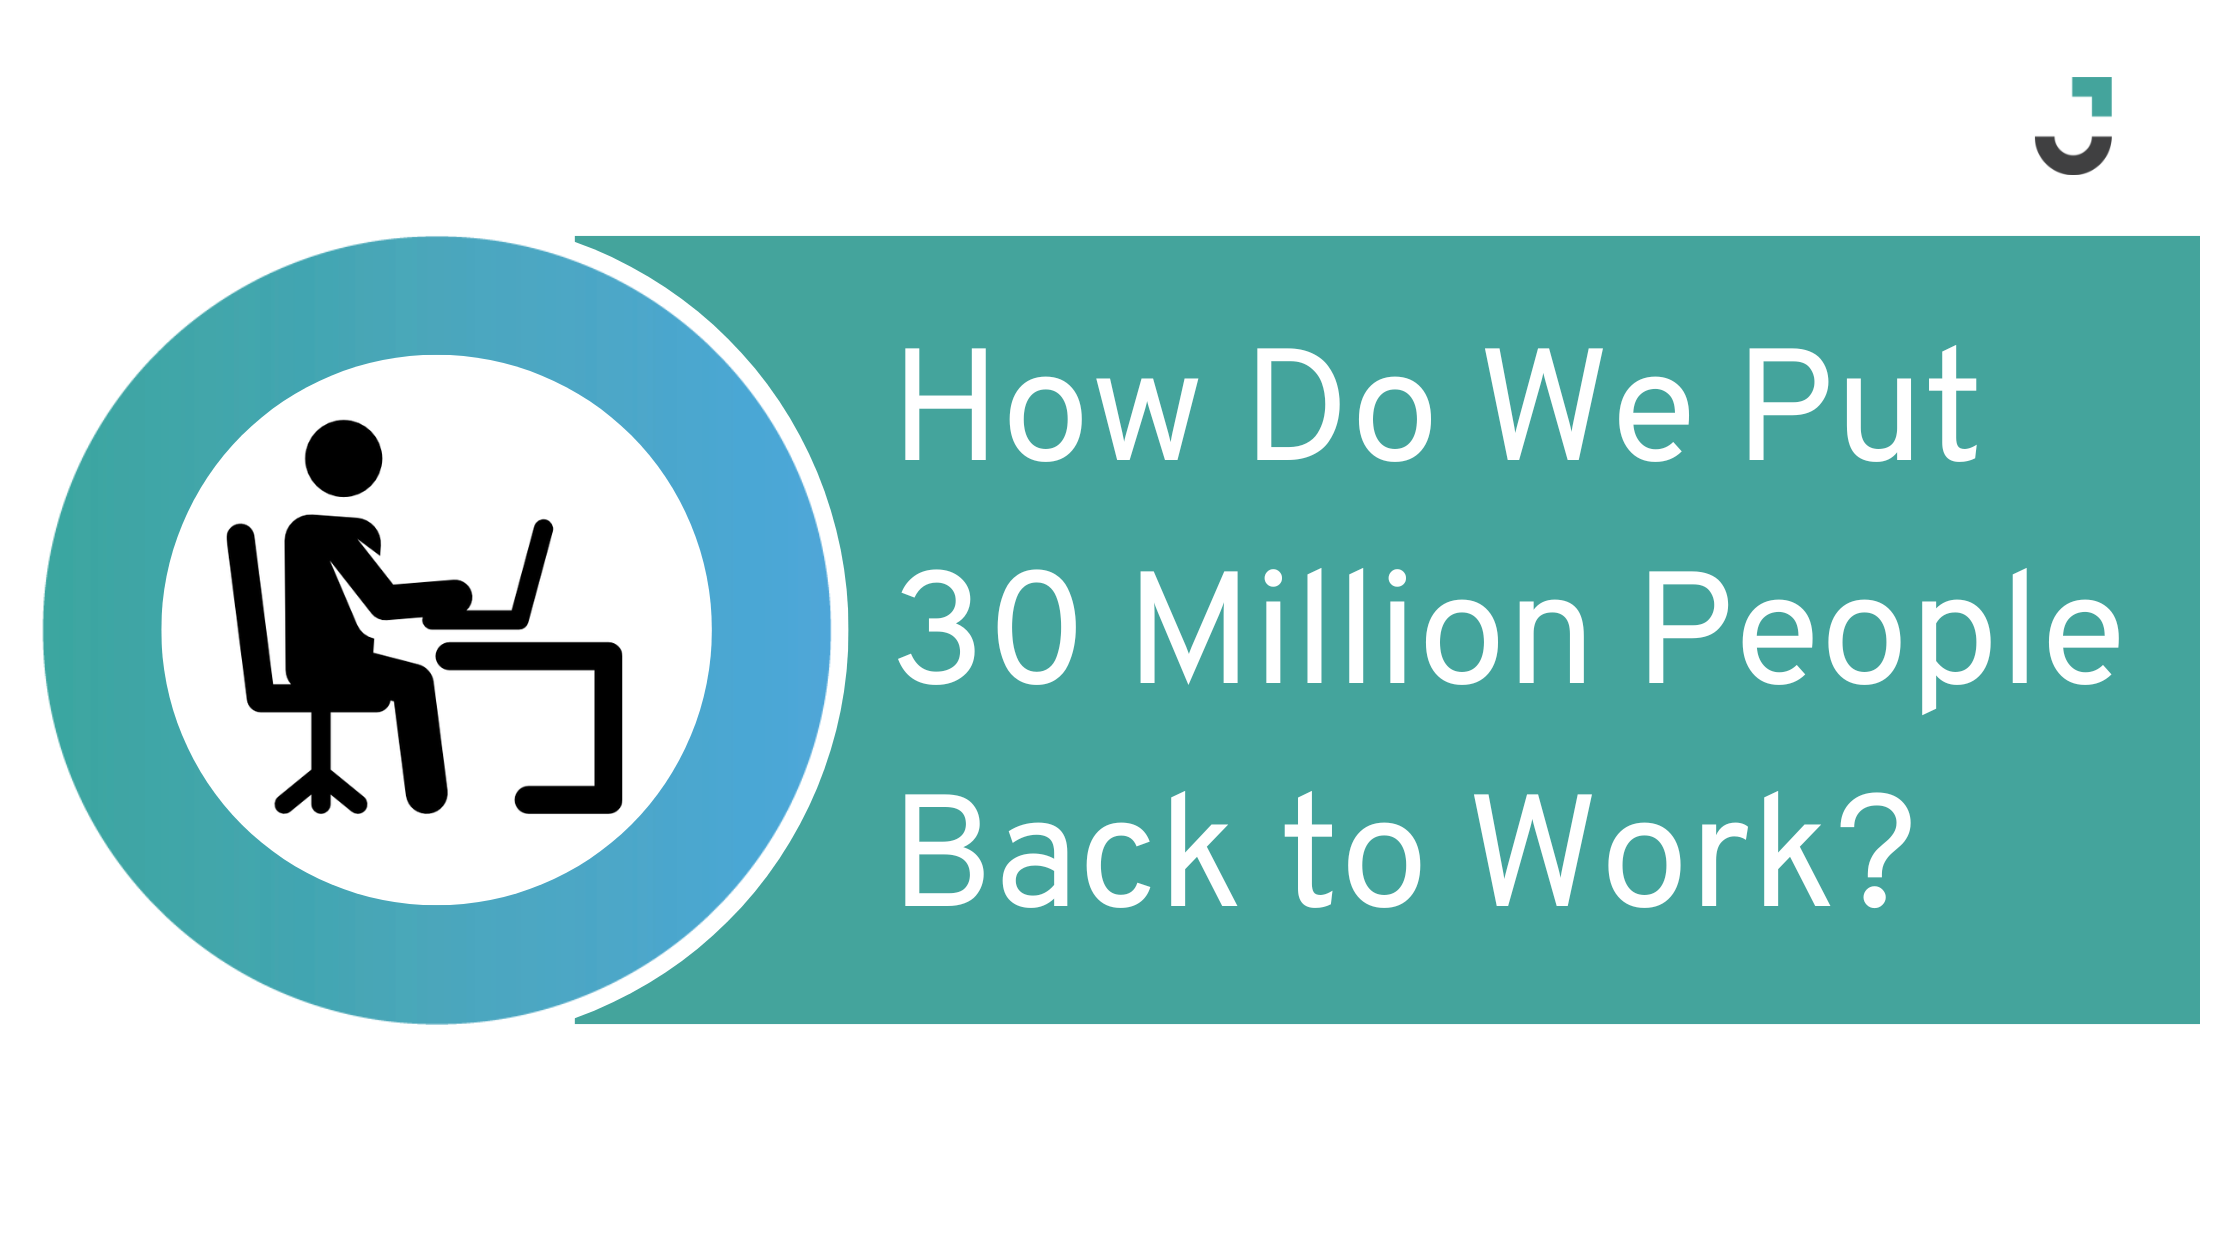 How Do We Put 30 Million People Back to Work?